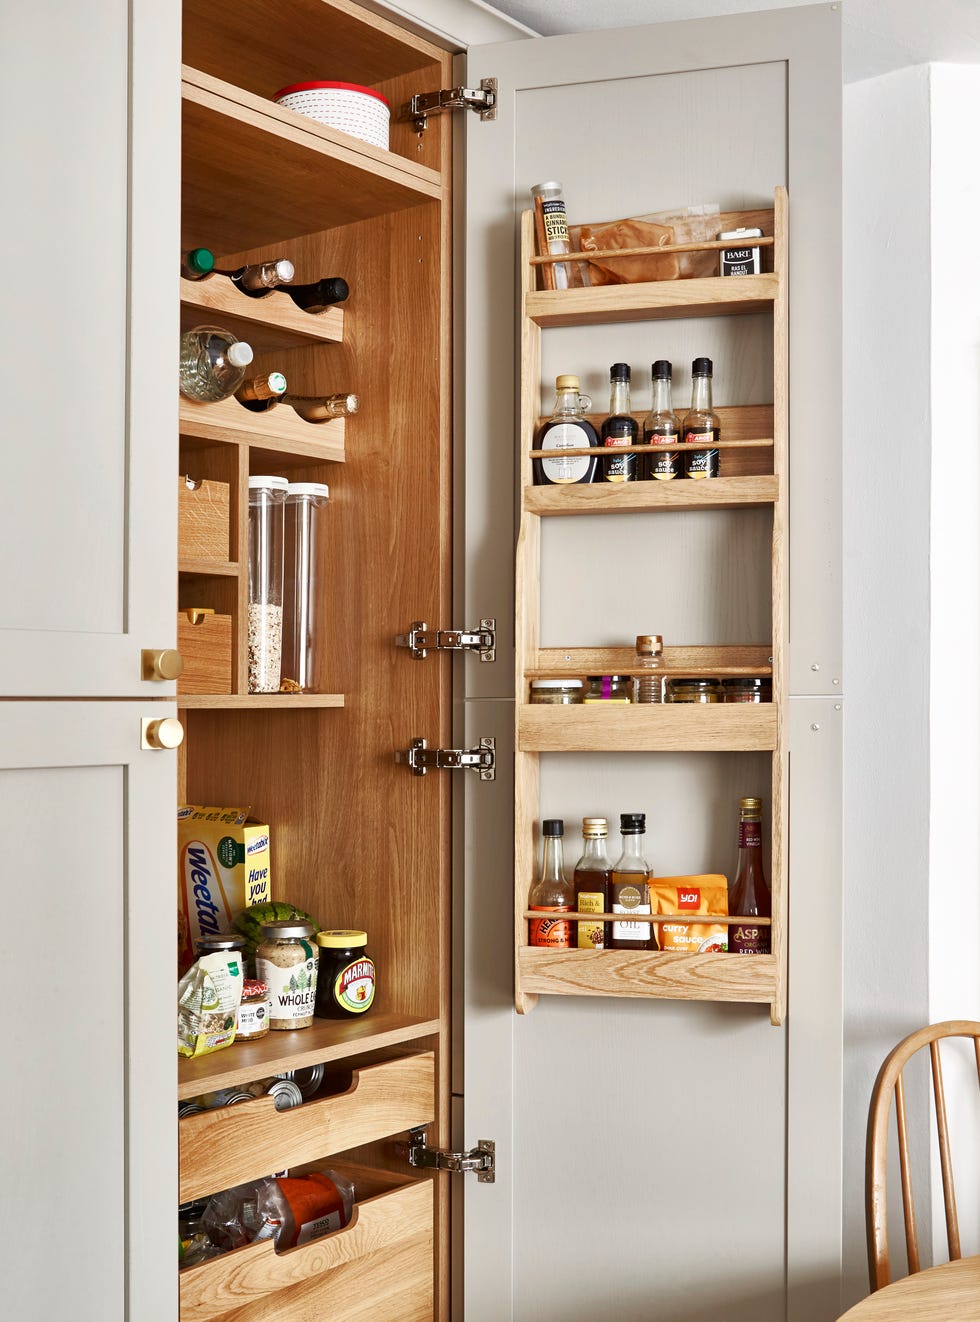 Food storage cabinet with shelves filled with dry goods, spices and oils in a soft grey Scandinavian style kitchen